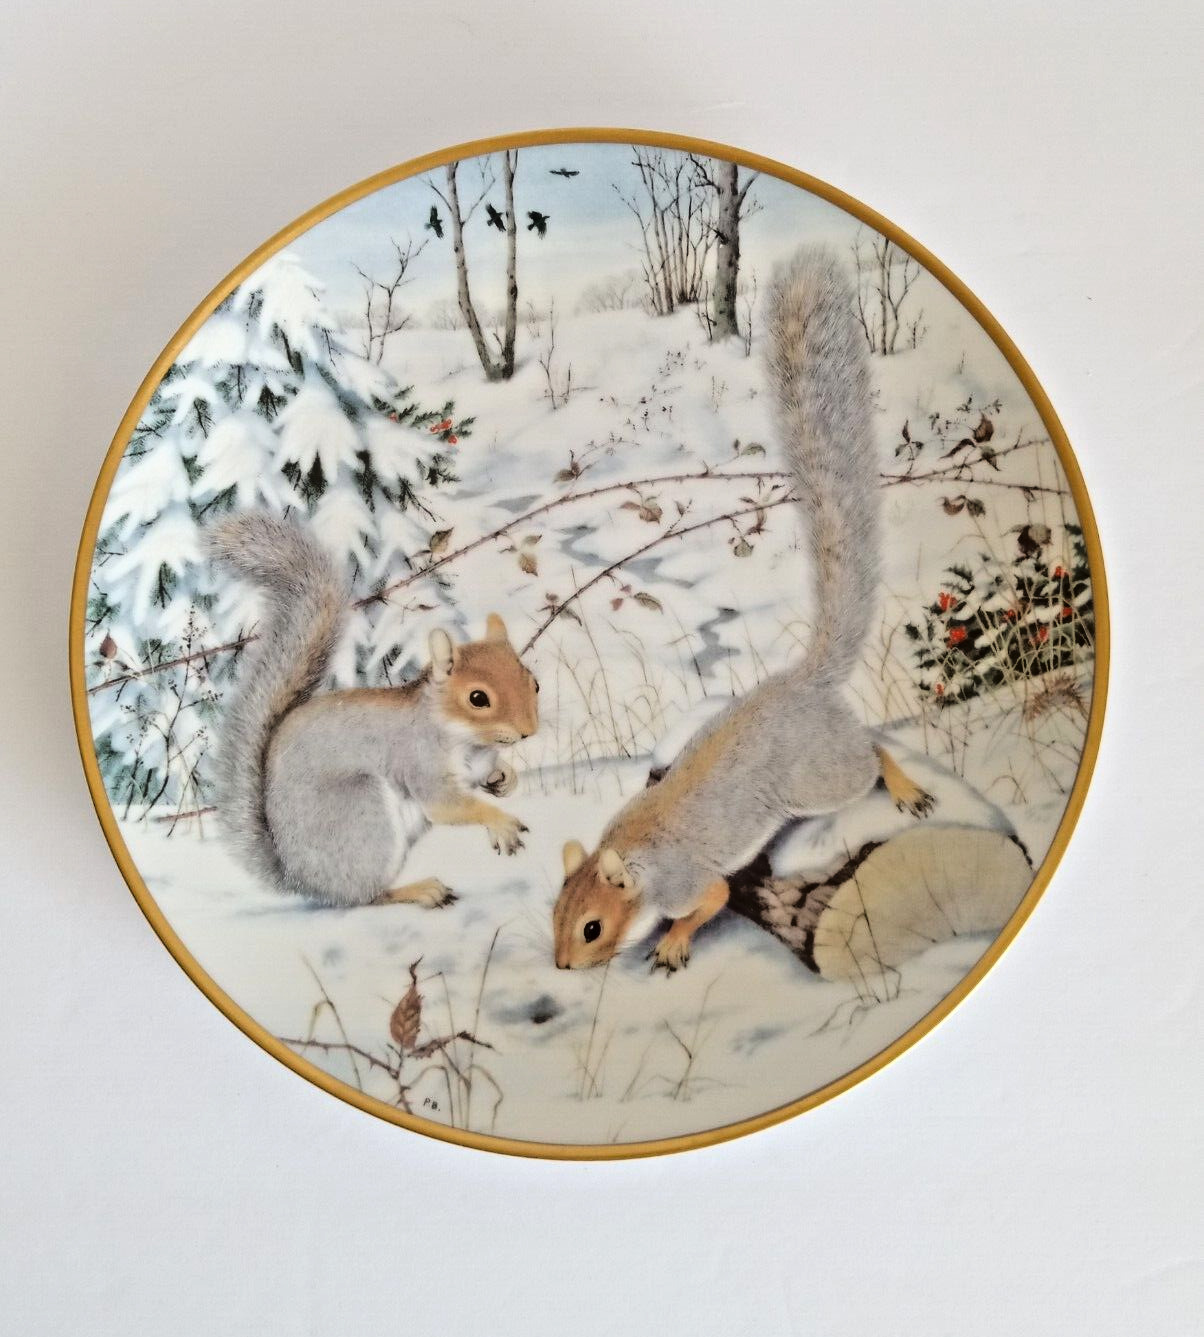 Woodland Year Squirreling for Nuts in January Plate Peter Barrett FP 1981